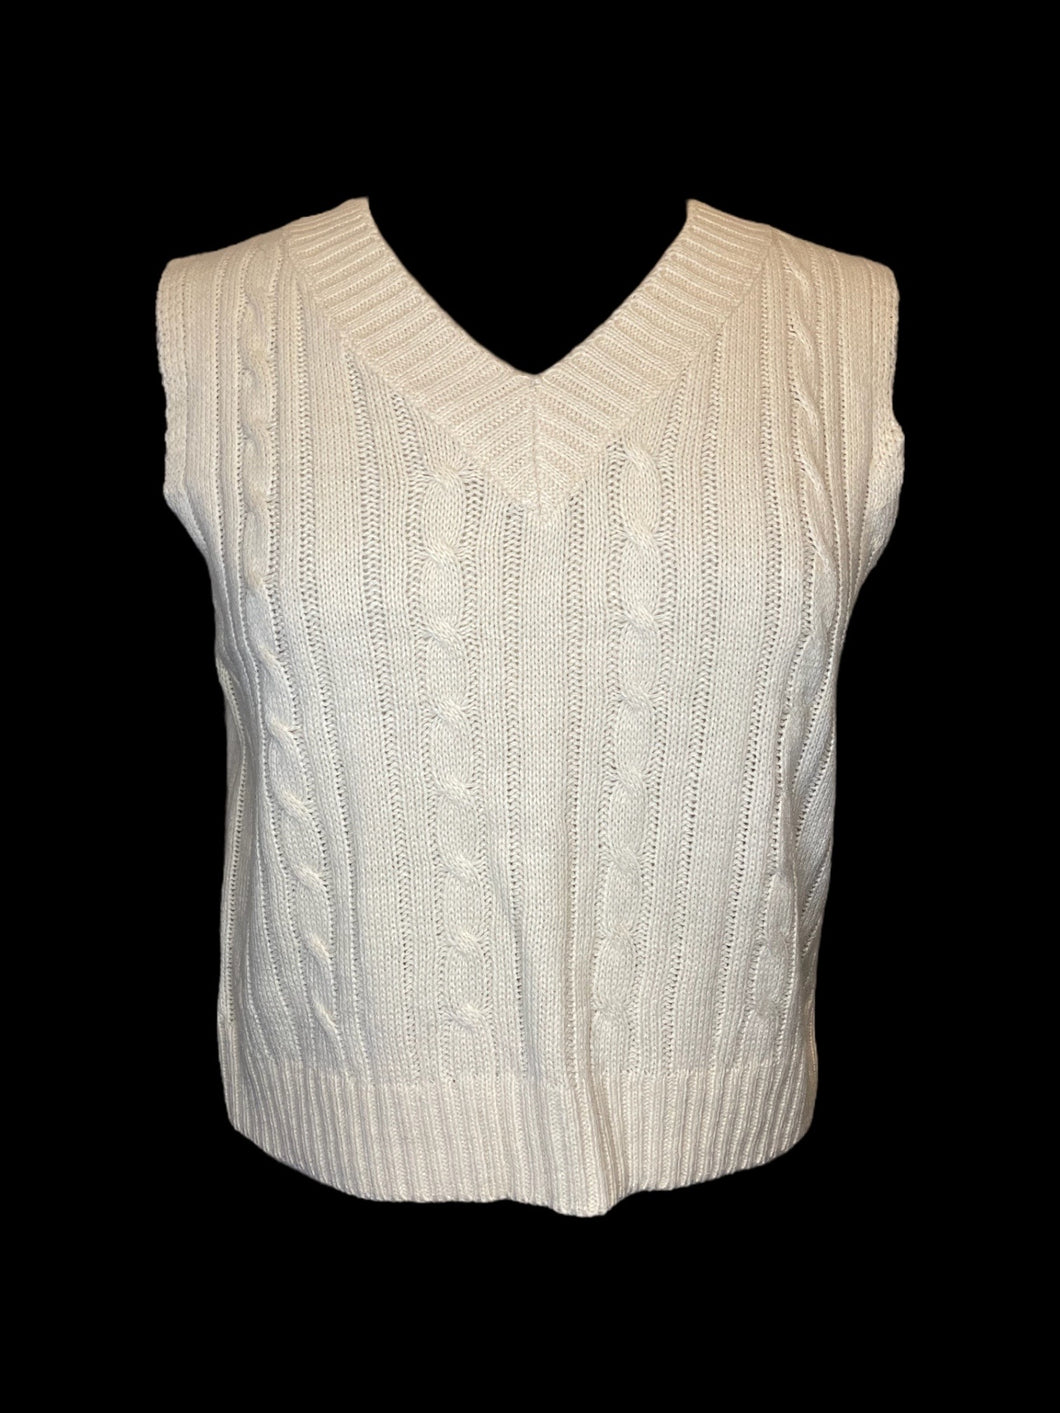 0X Cream cable knit v-neck crop sweater vest w/ ribbed hems